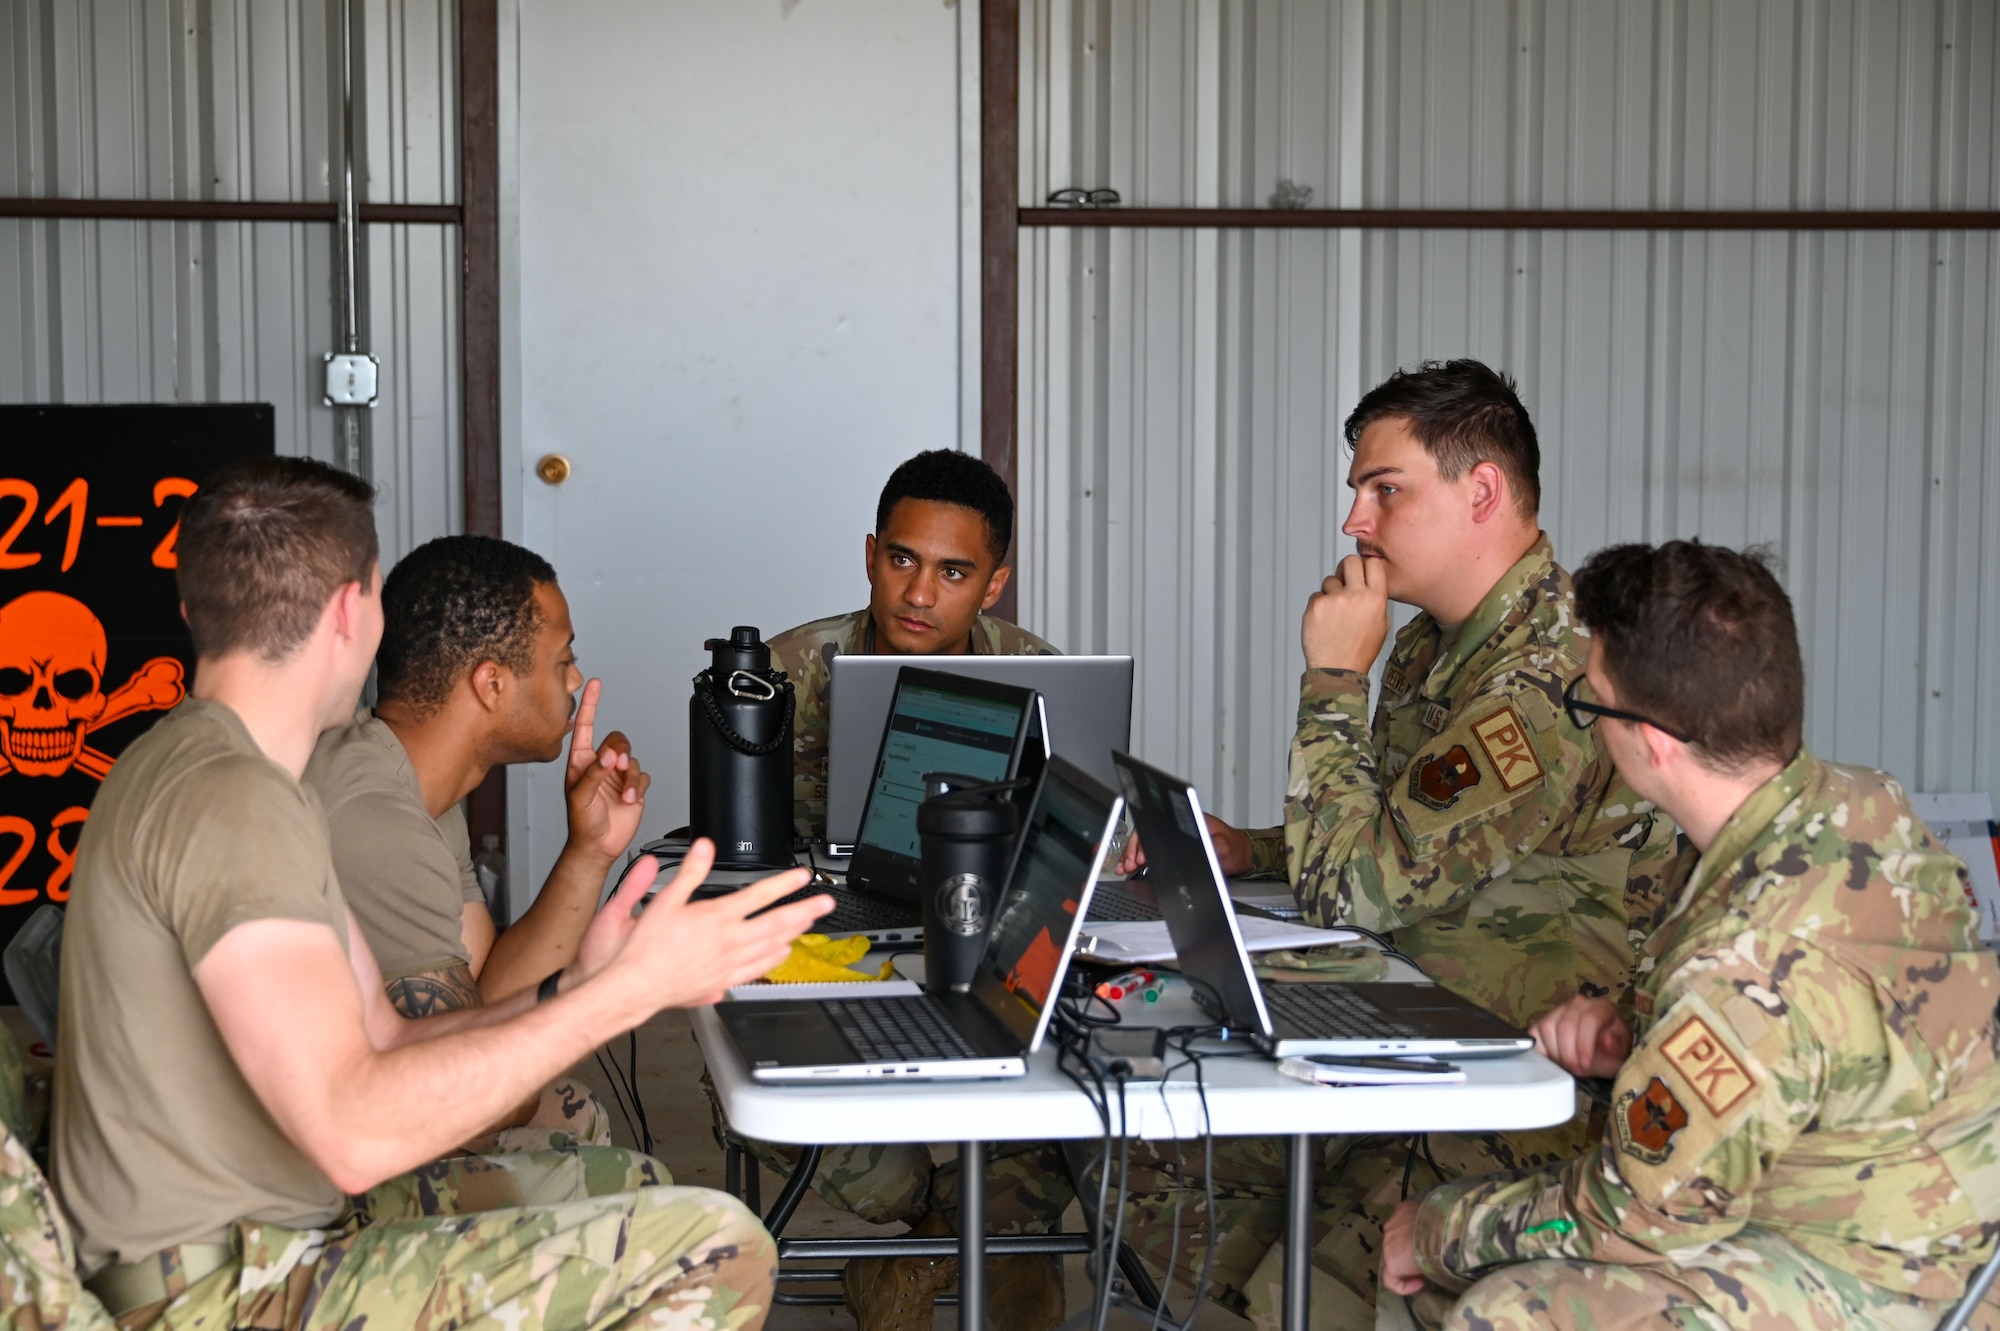 Airmen from the 97th Contracting Squadron participate in a deployment exercise at Altus Air Force Base, Oklahoma, May 18, 2023. The simulated deployed environment was established at Camp Little Bull, a 97th Civil Engineering Squadron training site. (U.S. Air Force photos by Senior Airman Kayla Christenson)